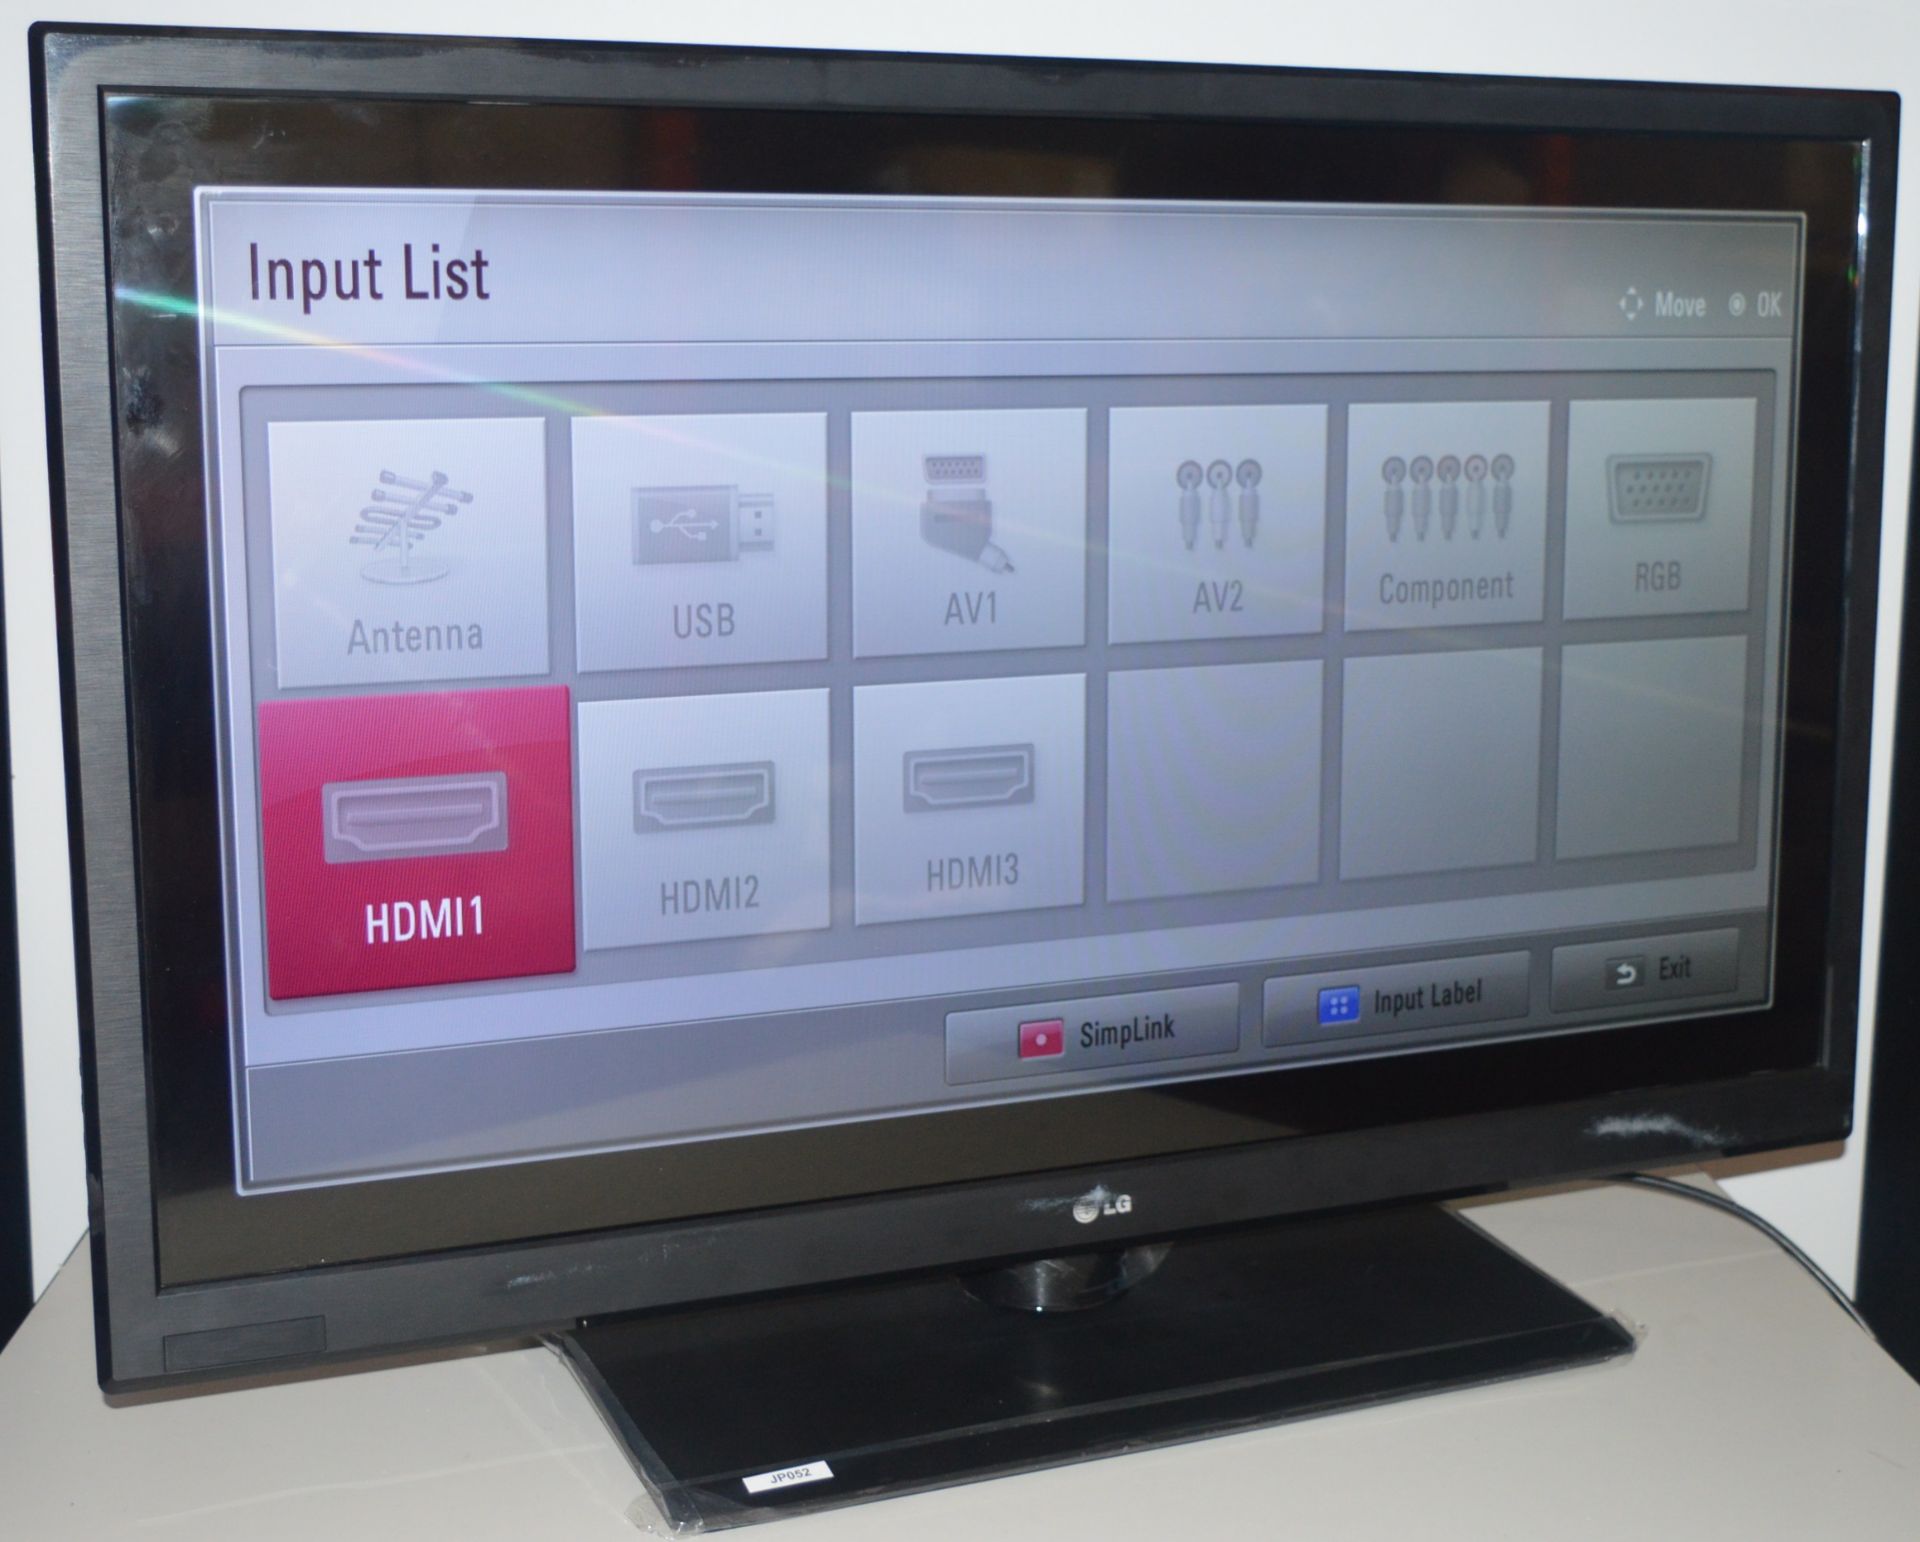 1 x LG 42LT360C 42 inch HD Ready LED TV with Freeview and 3 HDMI Ports - CL011 - Good Working - Image 2 of 11